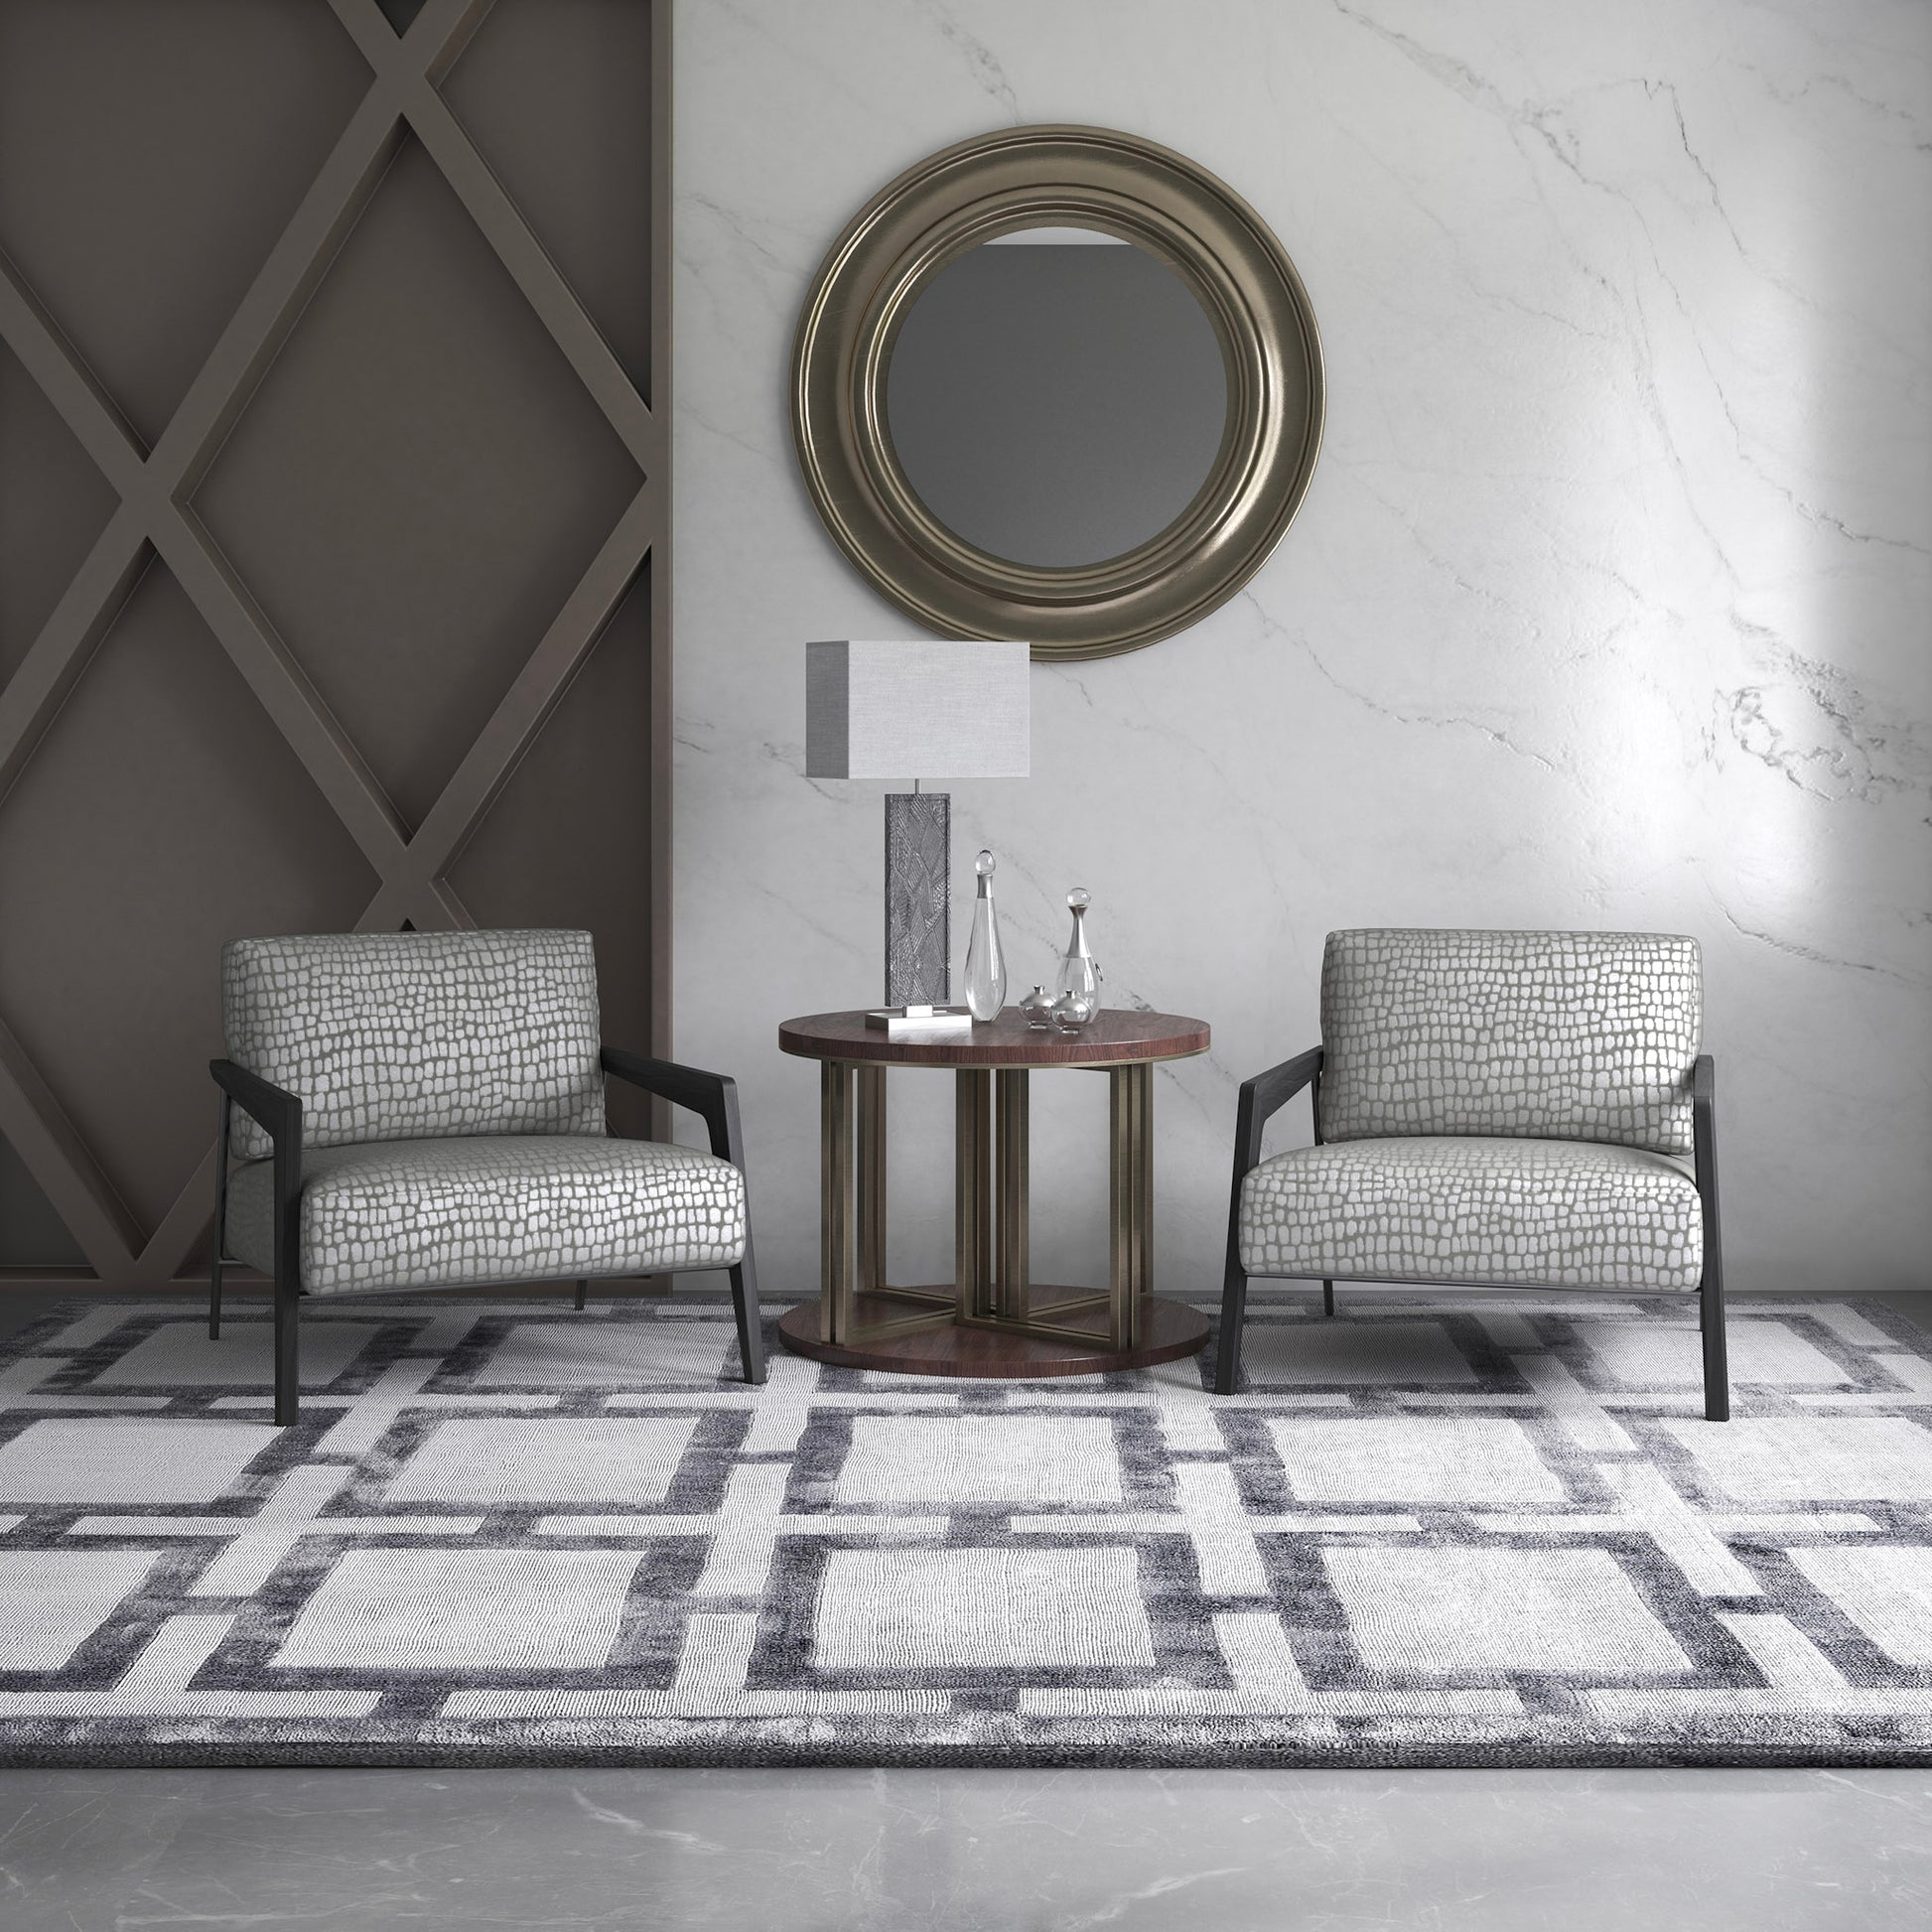 Cazador fabric part of the Sauvage collection shown on 2 ocassional chairs in a luxurious room with marble wall, geometric style rug and expensive looking wooden side table and mirror